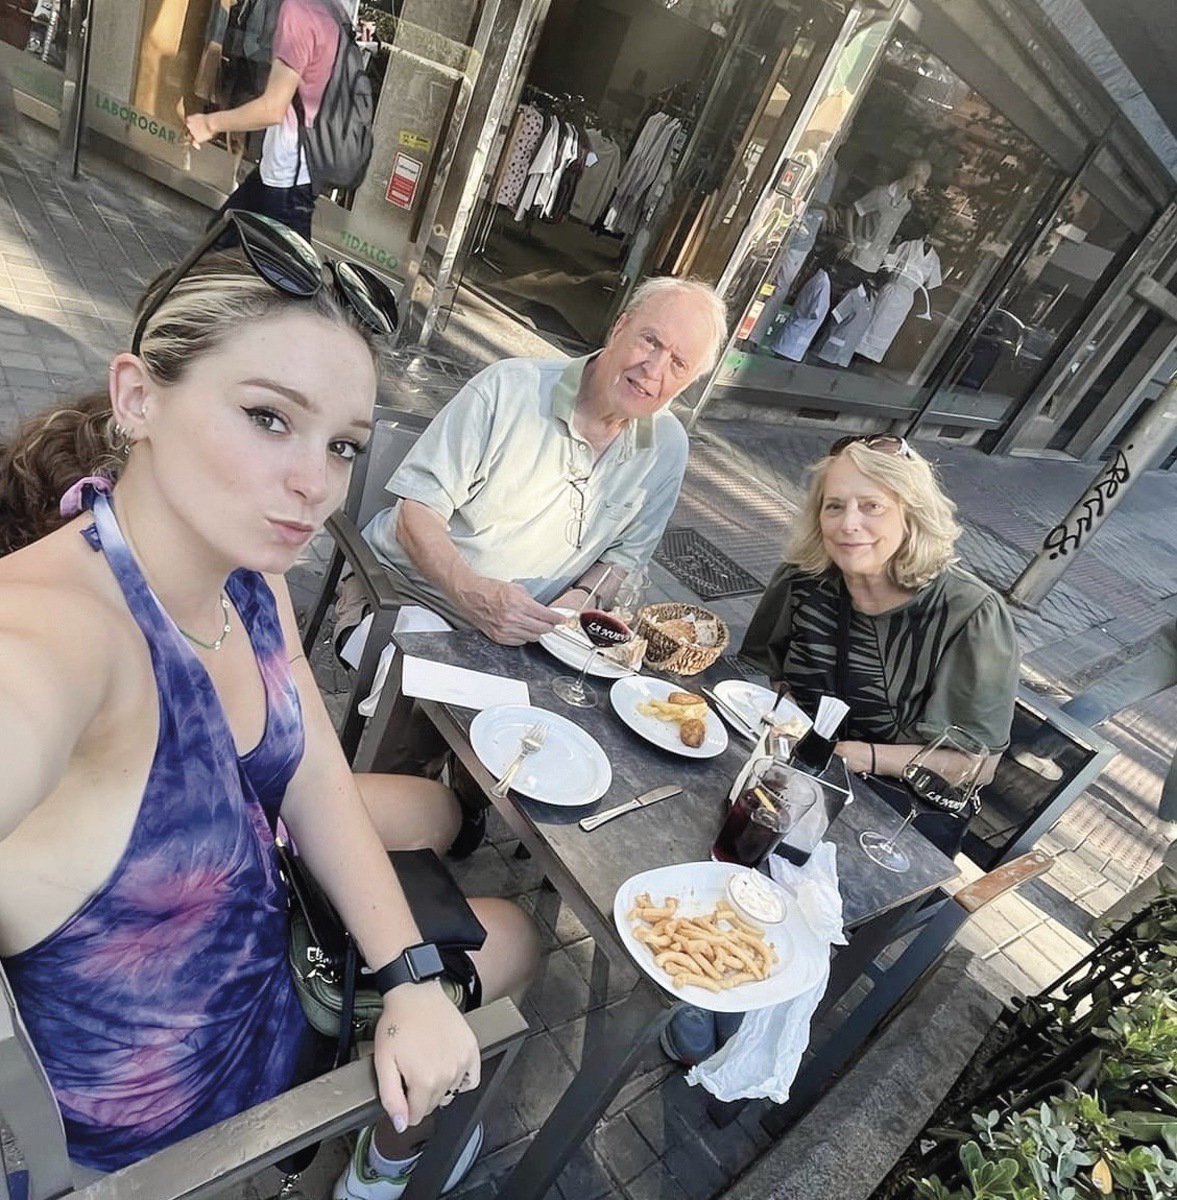 Mike and Eileen Giltner join their granddaughter, Daphne, who attends college in Madrid, for a meal along a sidewalk. (Photo provided)